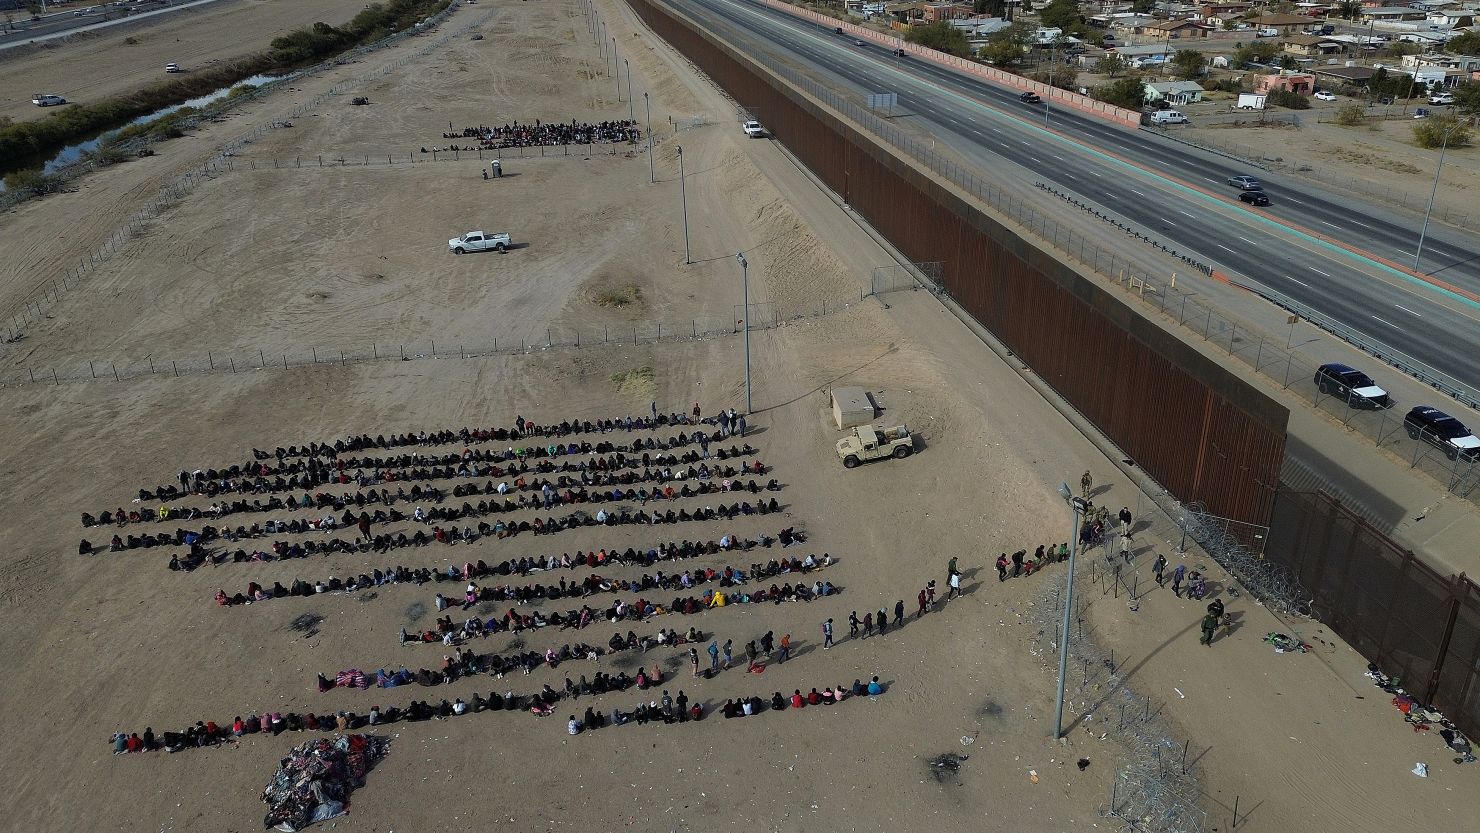 Aerial view showing migrants queuing at the border fence in an attempt to cross into the United States in Ciudad Juarez Chihuahua, Mexico, on 19 December 2023. Texas' new anti-migrant law is causing fear among the growing number of migrants stranded in Ciudad Juarez, on Mexico's northern border, where undocumented migrants fear it will make it even more difficult for them to cross into the United States.